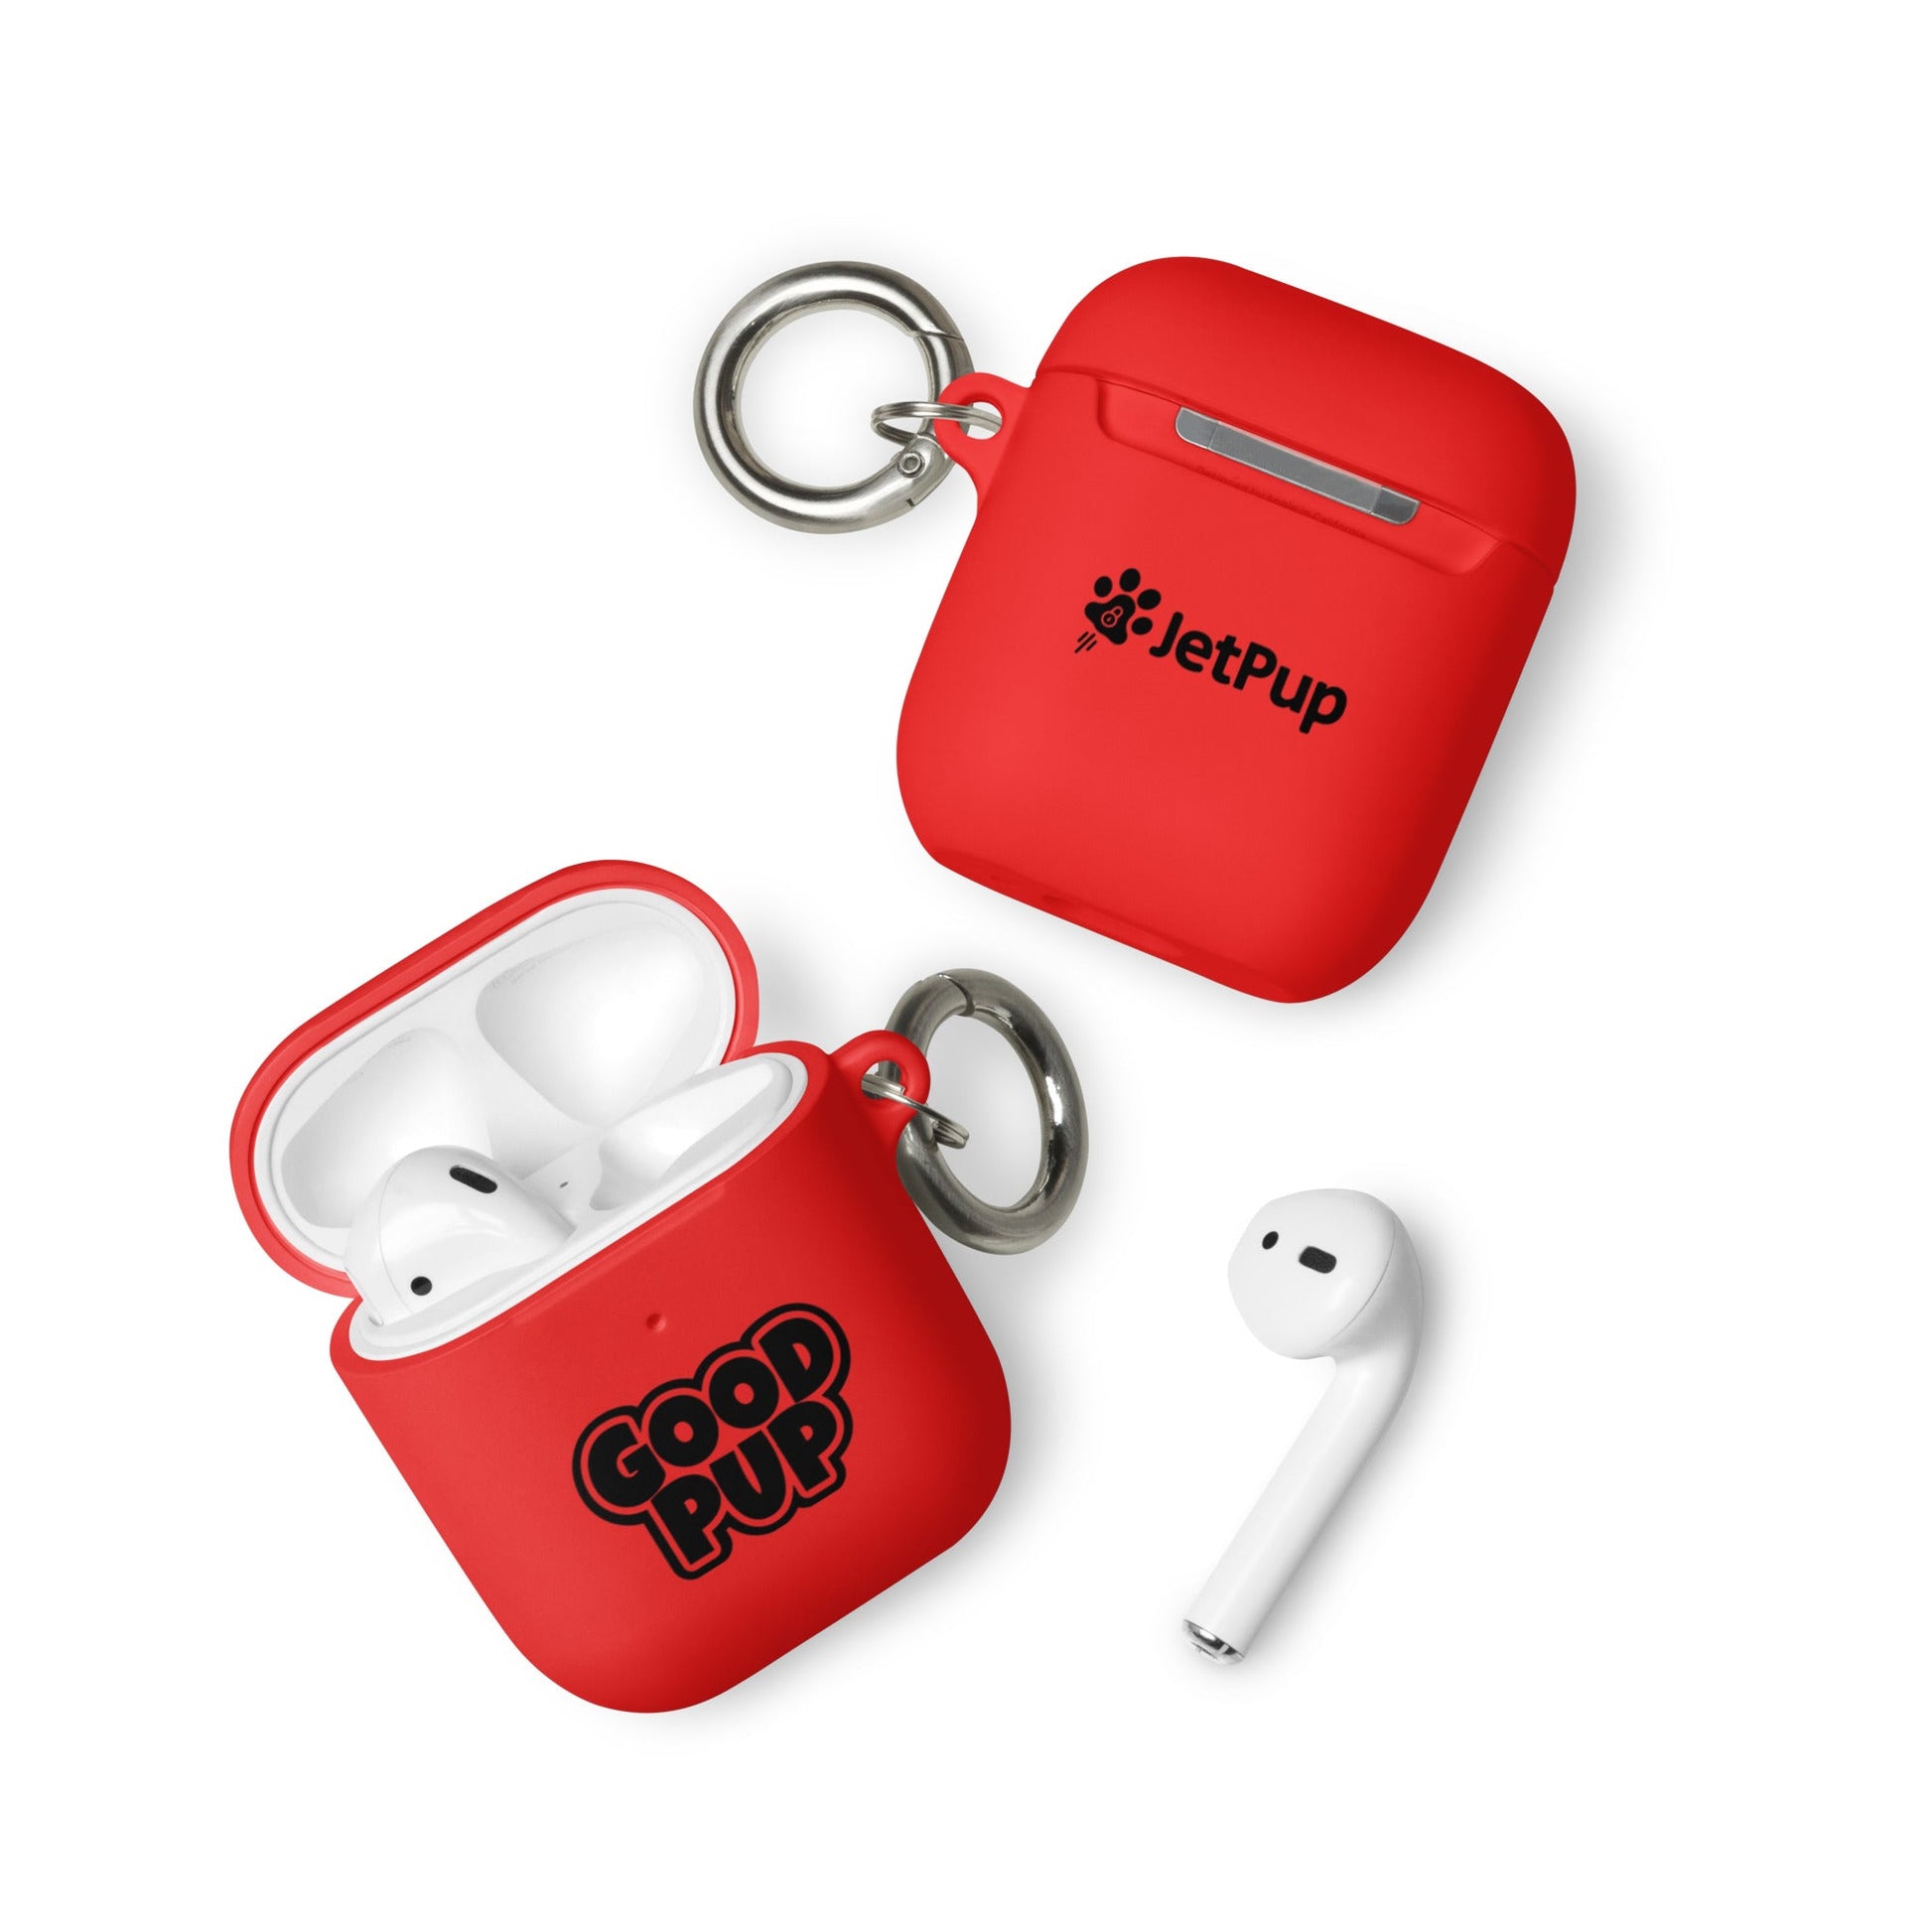 Good Pup AirPods Case - Red - JetPup